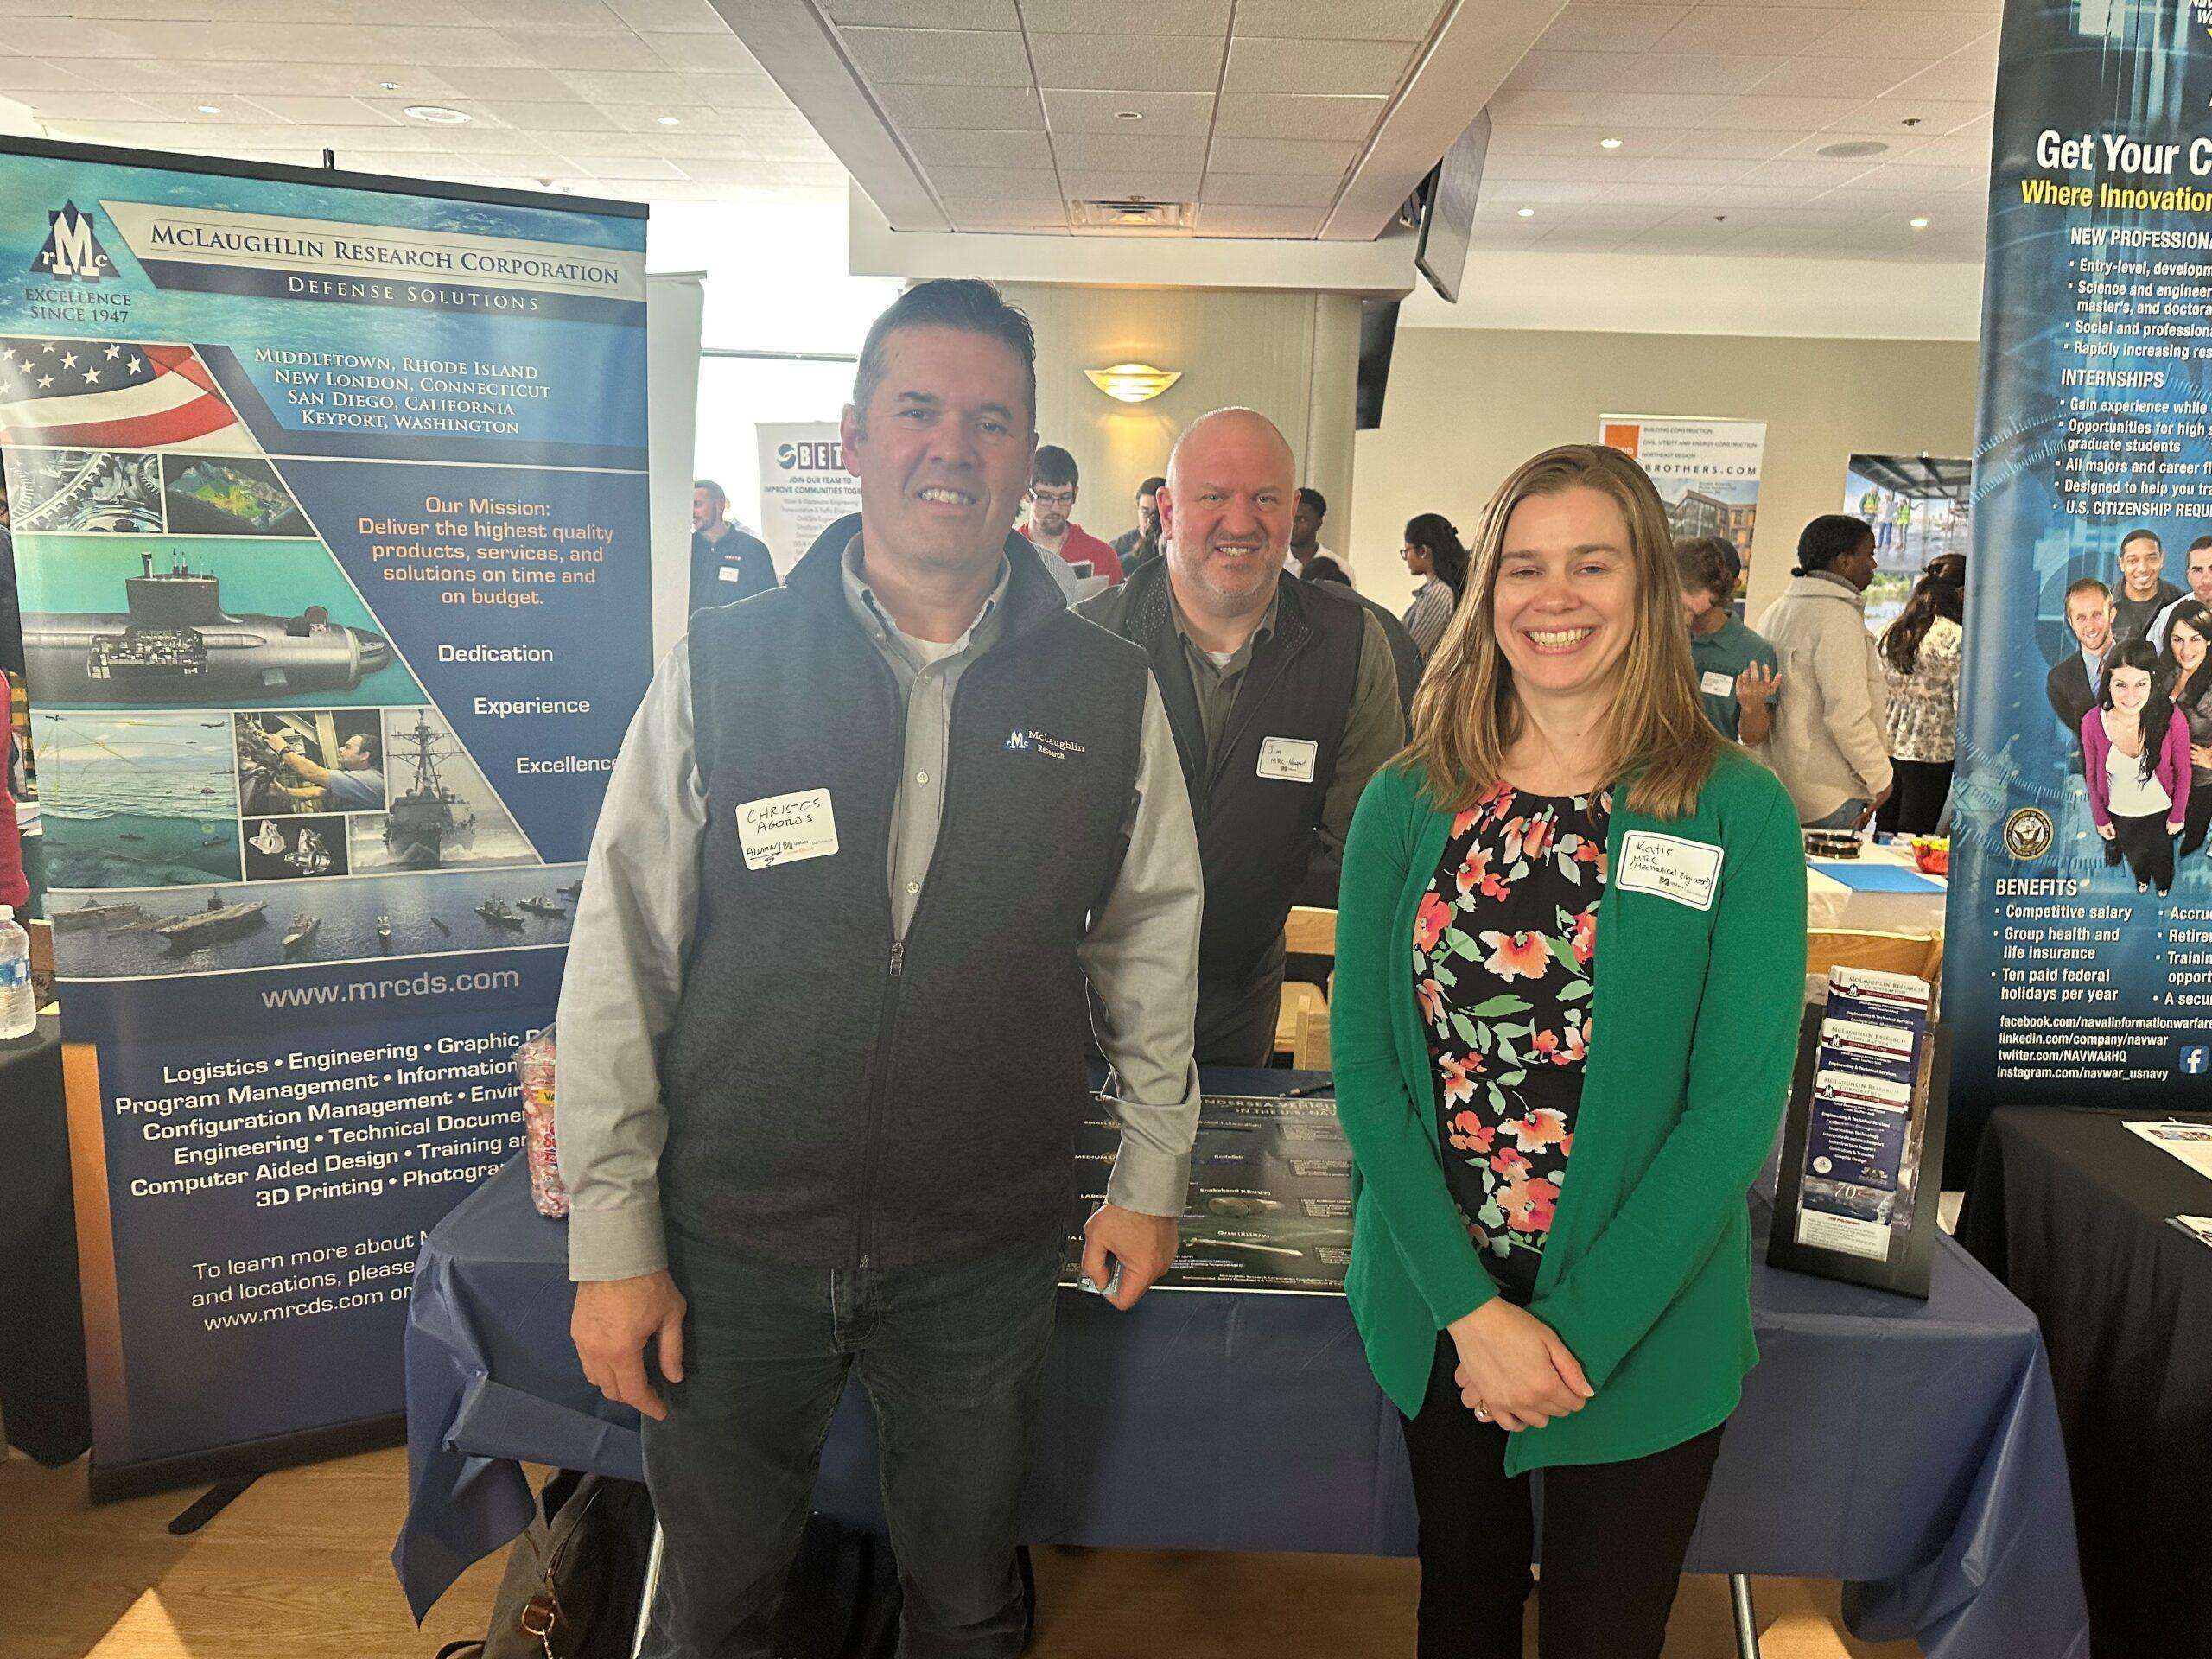 17 October 2023-MRC had the opportunity to meet with bright young professionals about potential careers and learning opportunities we have to offer. Thank you to the Umass Dartmouth Career Center for hosting this event, giving the next generation of professionals the opportunity to network and showcase their interests!